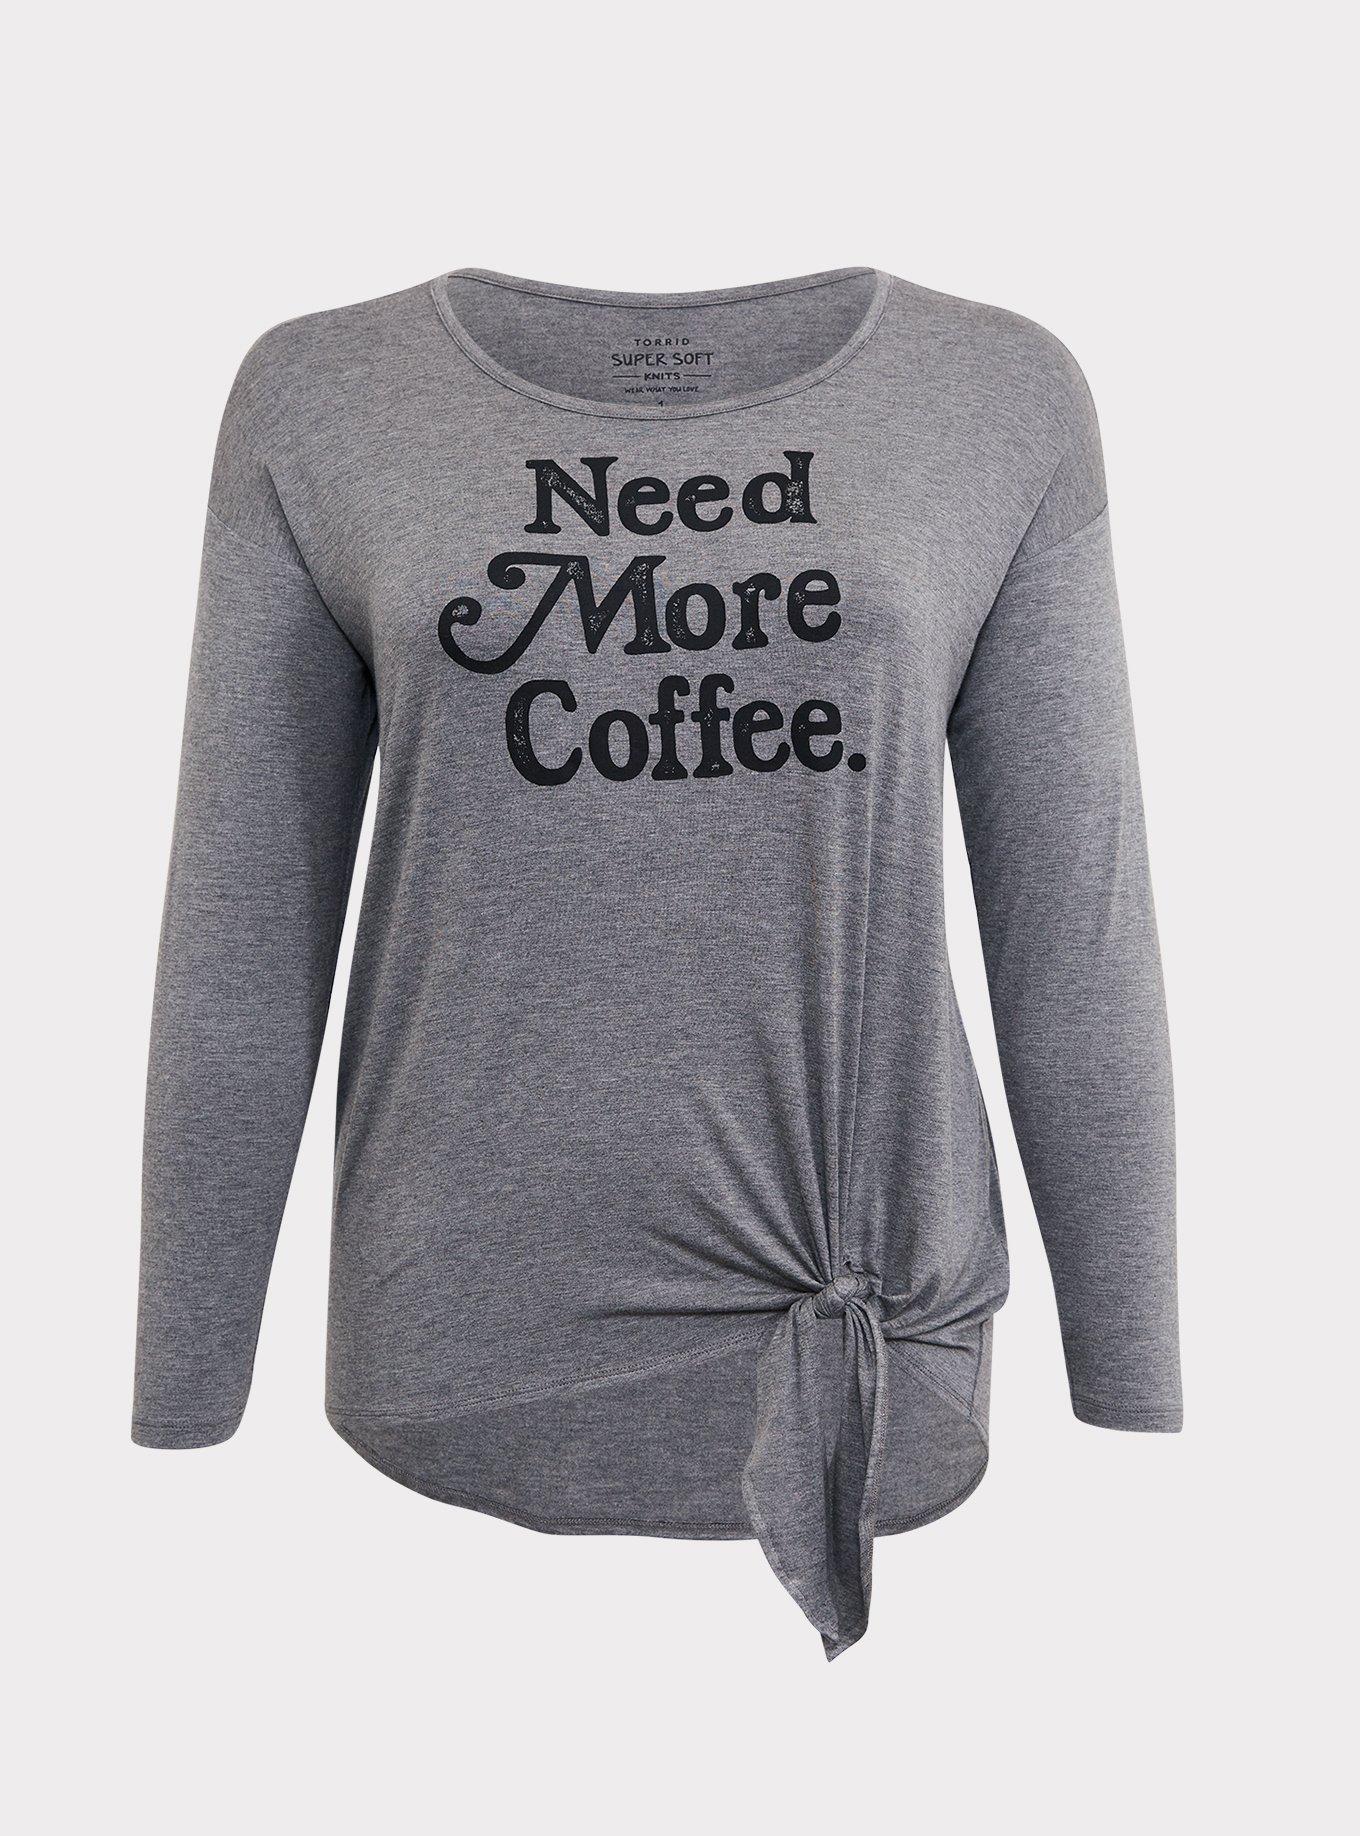 Plus Size - Need More Coffee Super Soft Grey Tie Front Tunic Tee - Torrid